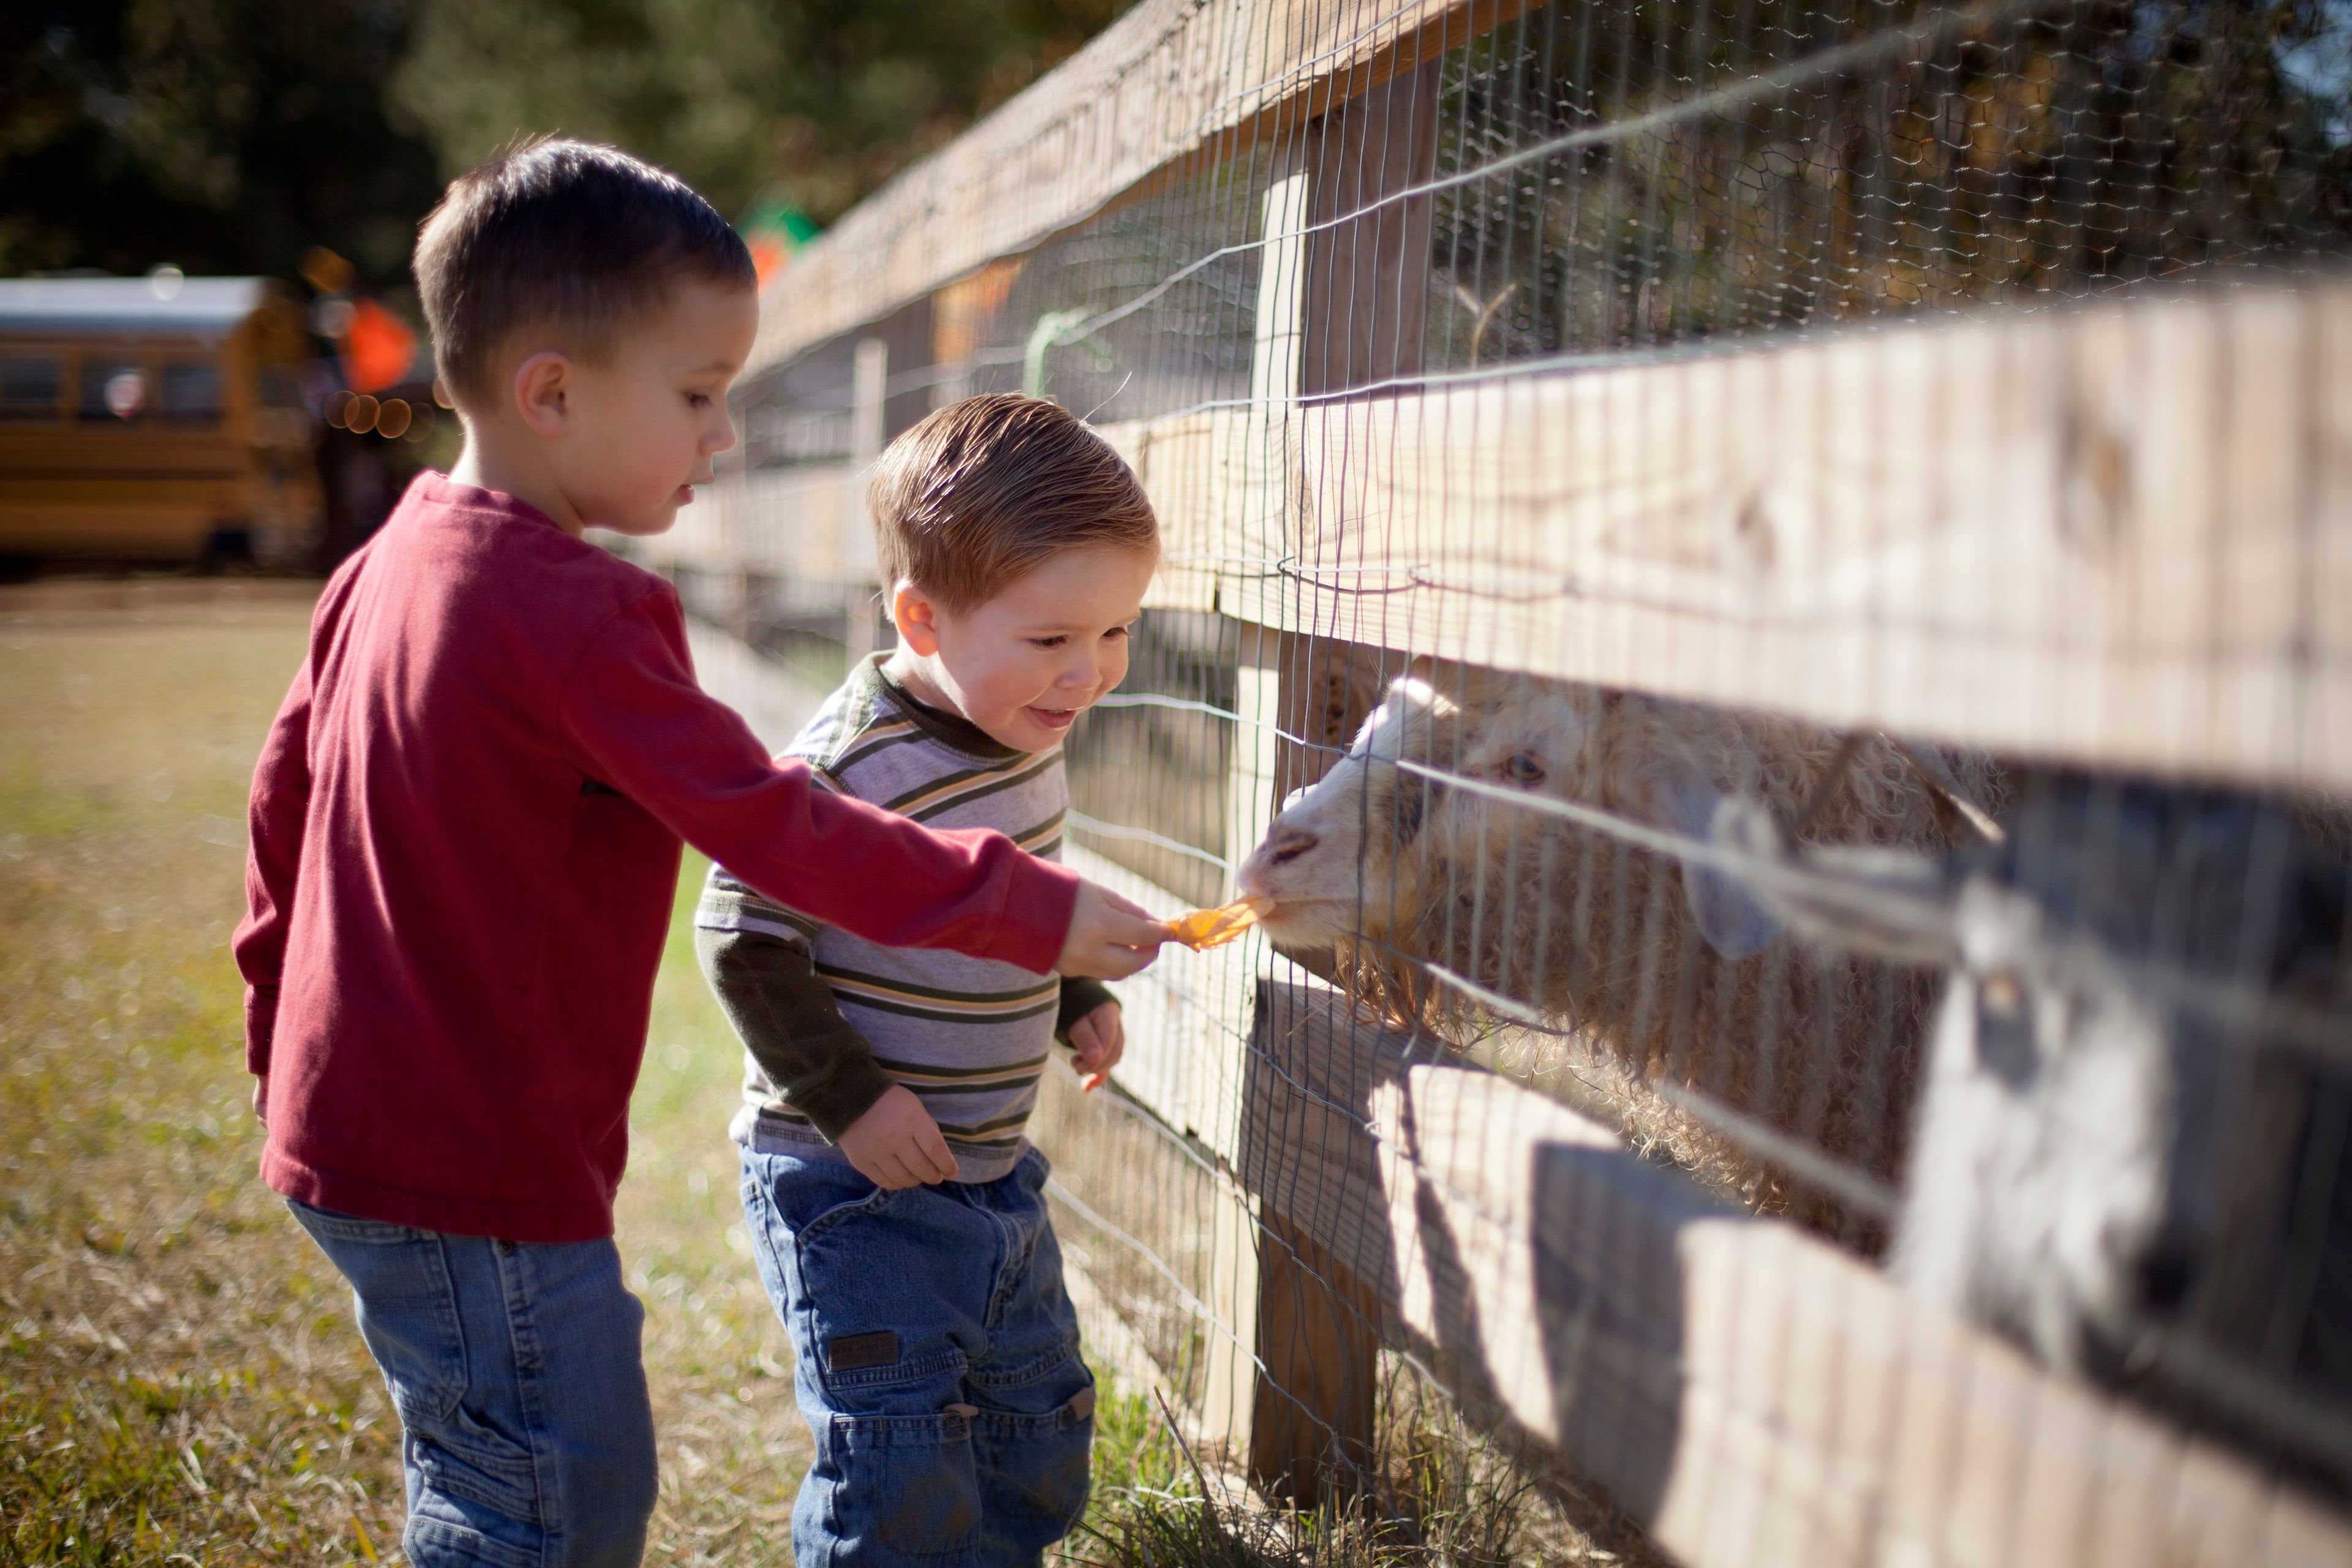 Two brothers feed a sheep through a fence.  